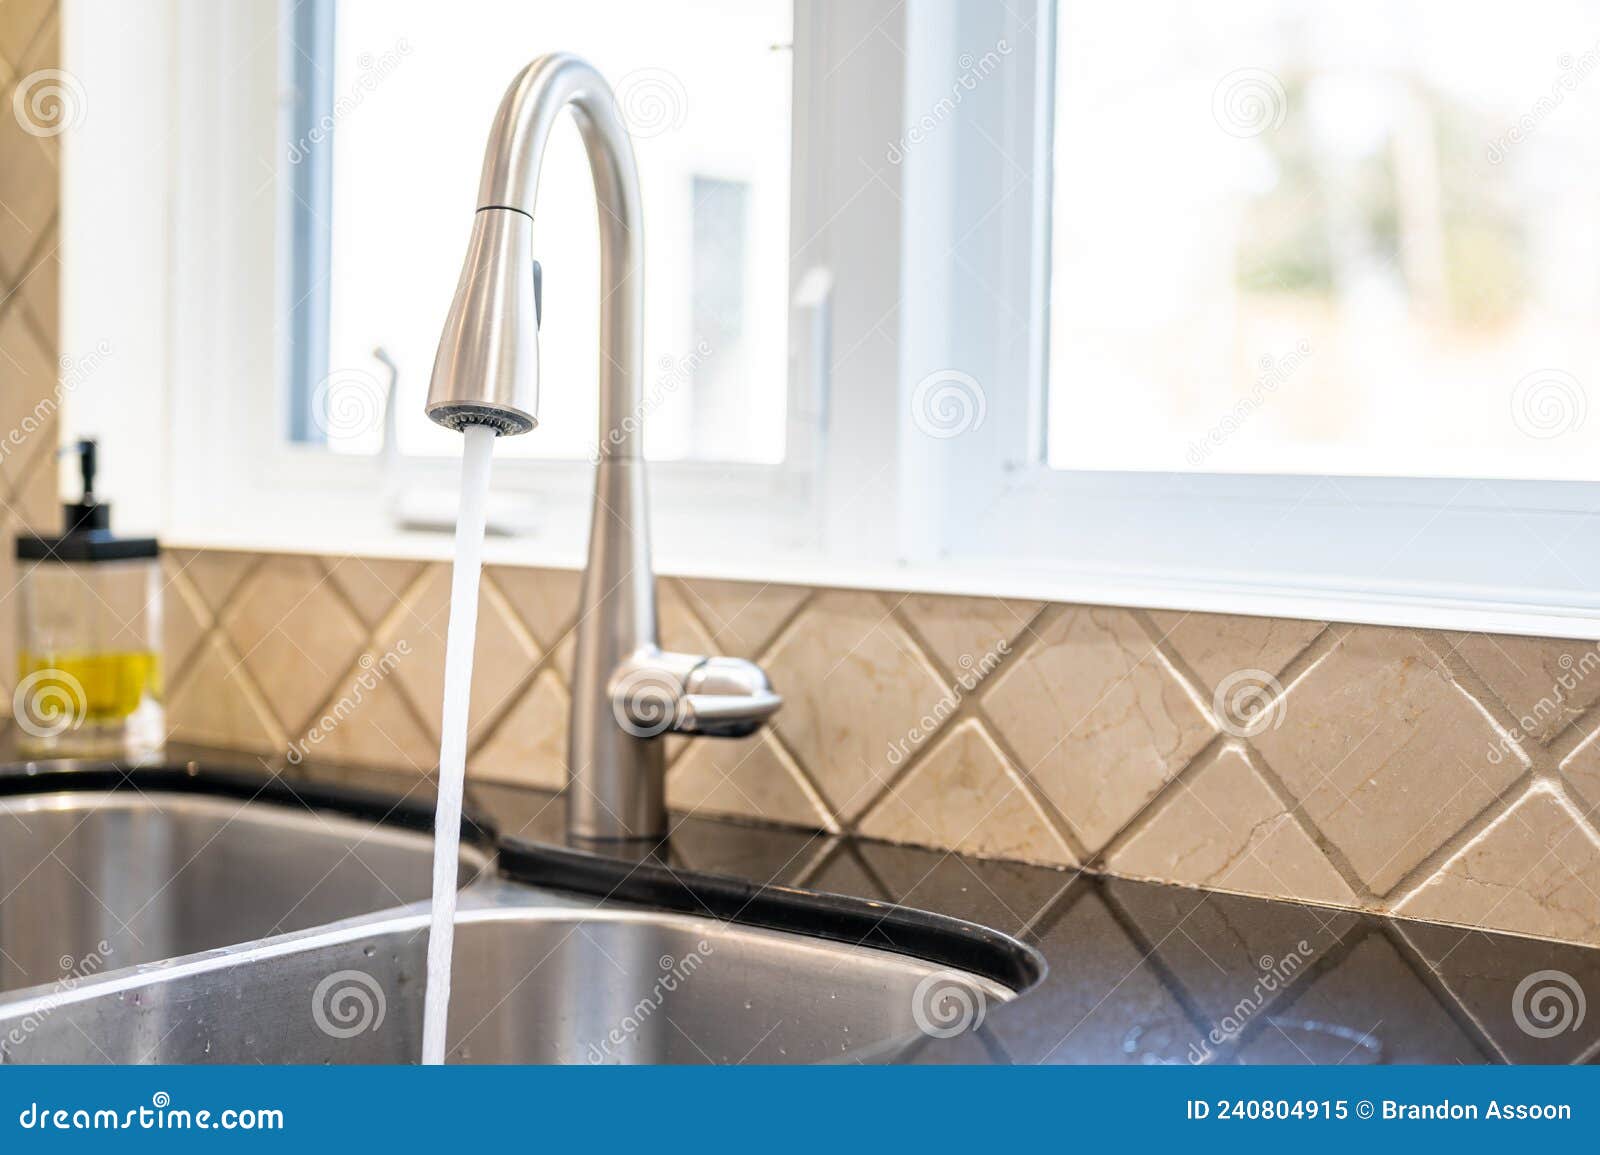 Kitchen Sink with Tiles in the Background and Windo W Stock Image ...